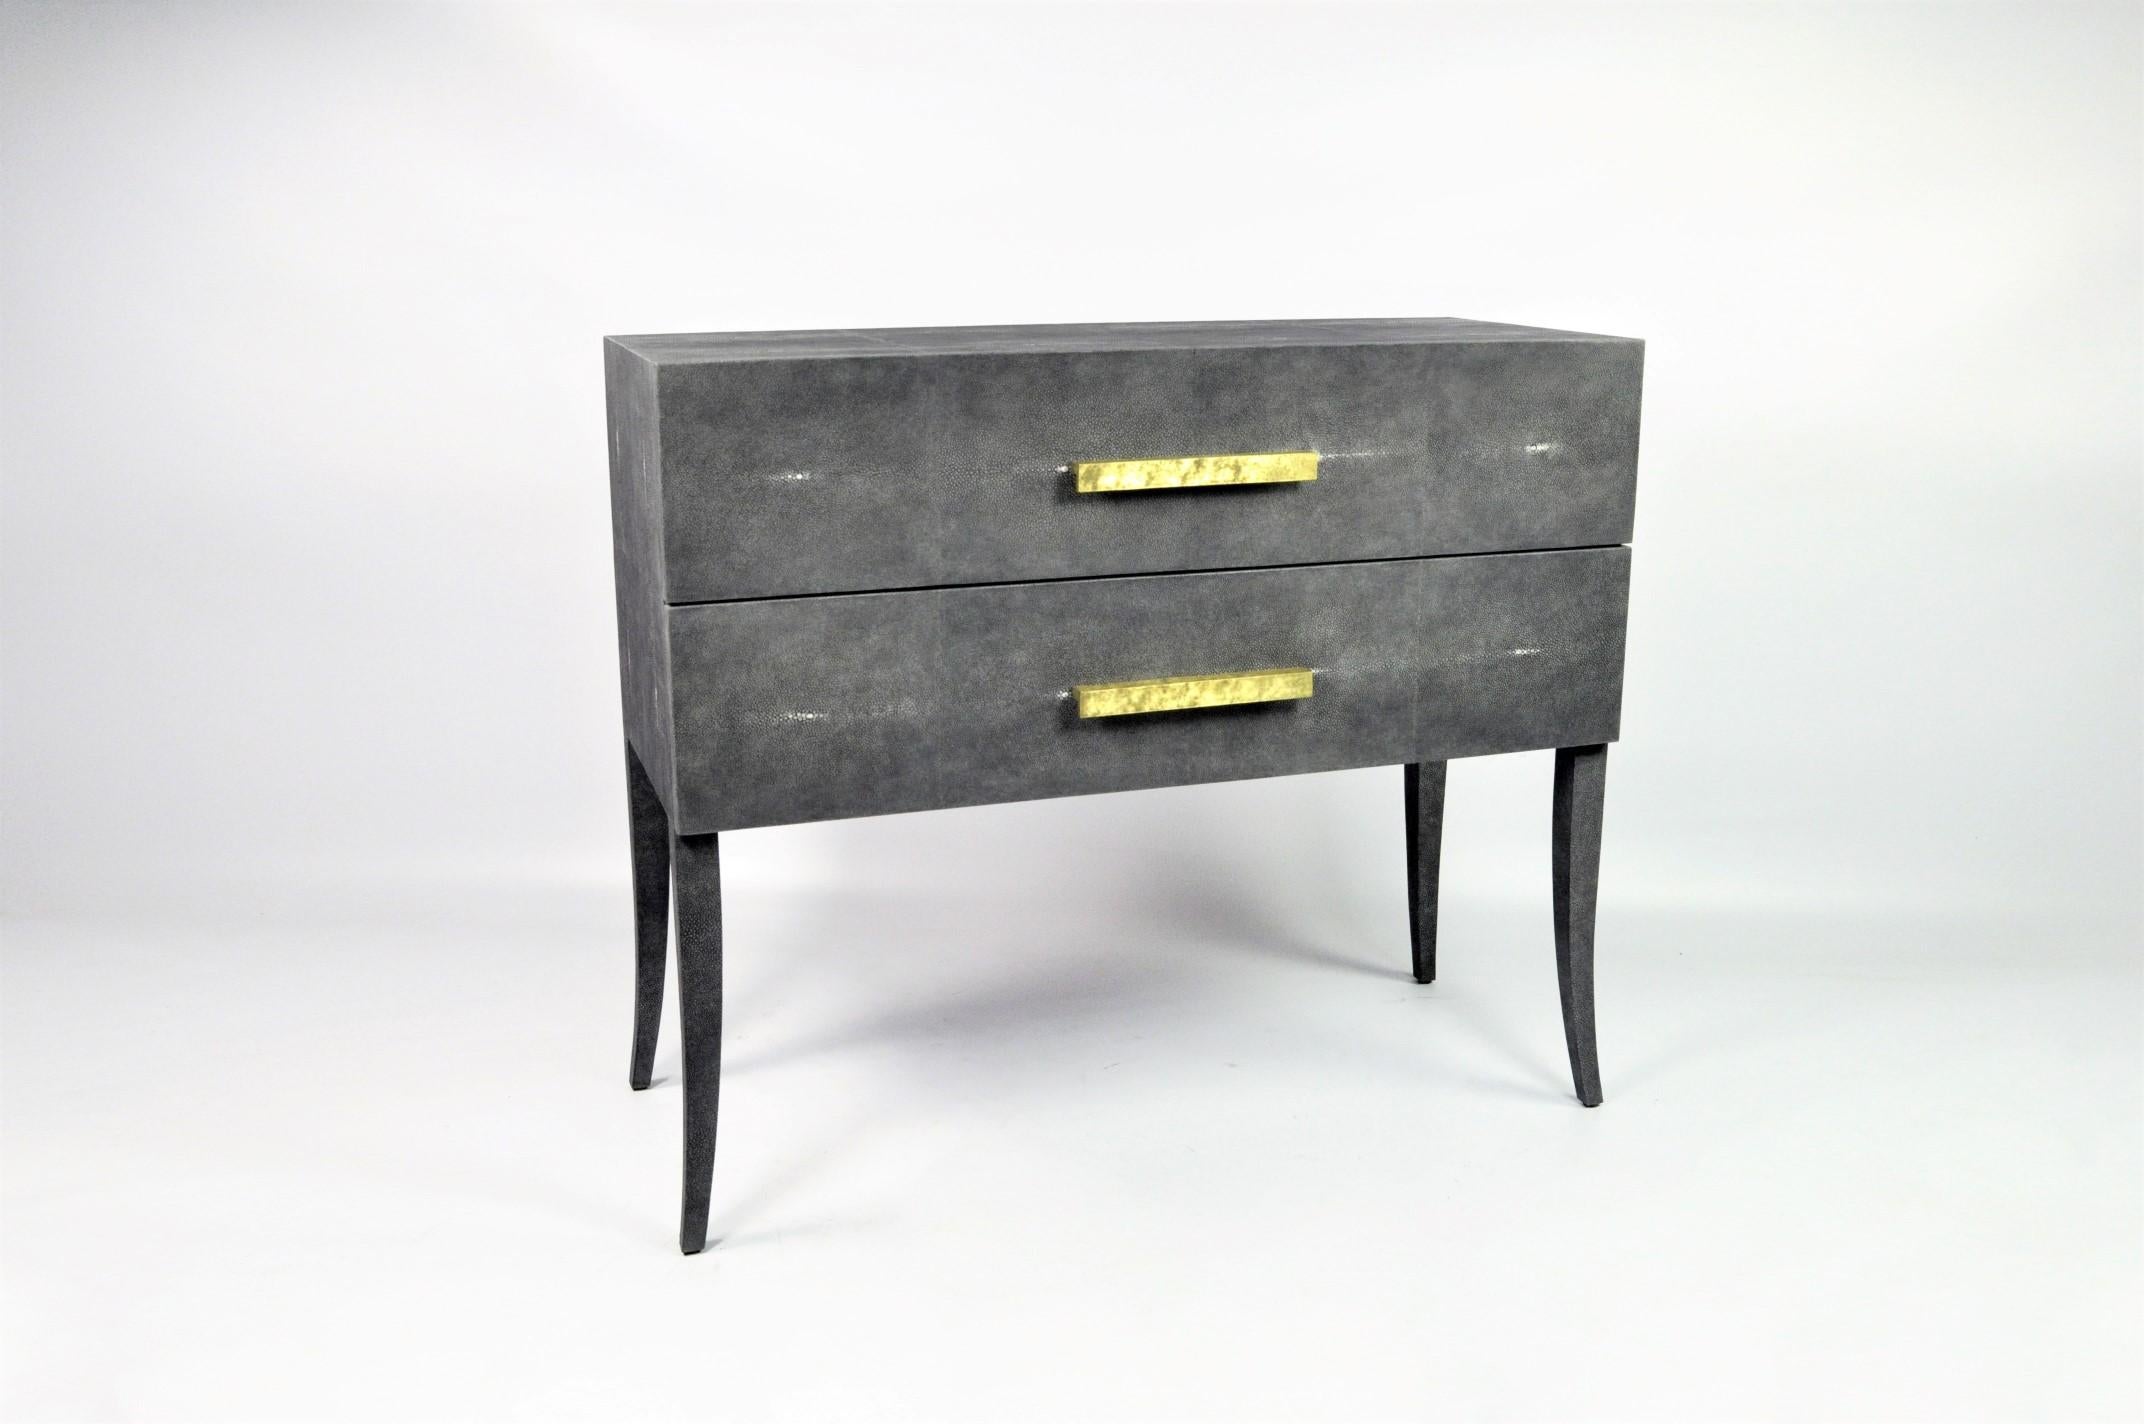 This chest of drawers is made of dark grey shagreen (our ref CARBON).
It has 2 drawers with large brass handles. The brass has been hammered by hand to give an irregular and artistic finish aspect.
The interior is made with a dark wood veneer.
